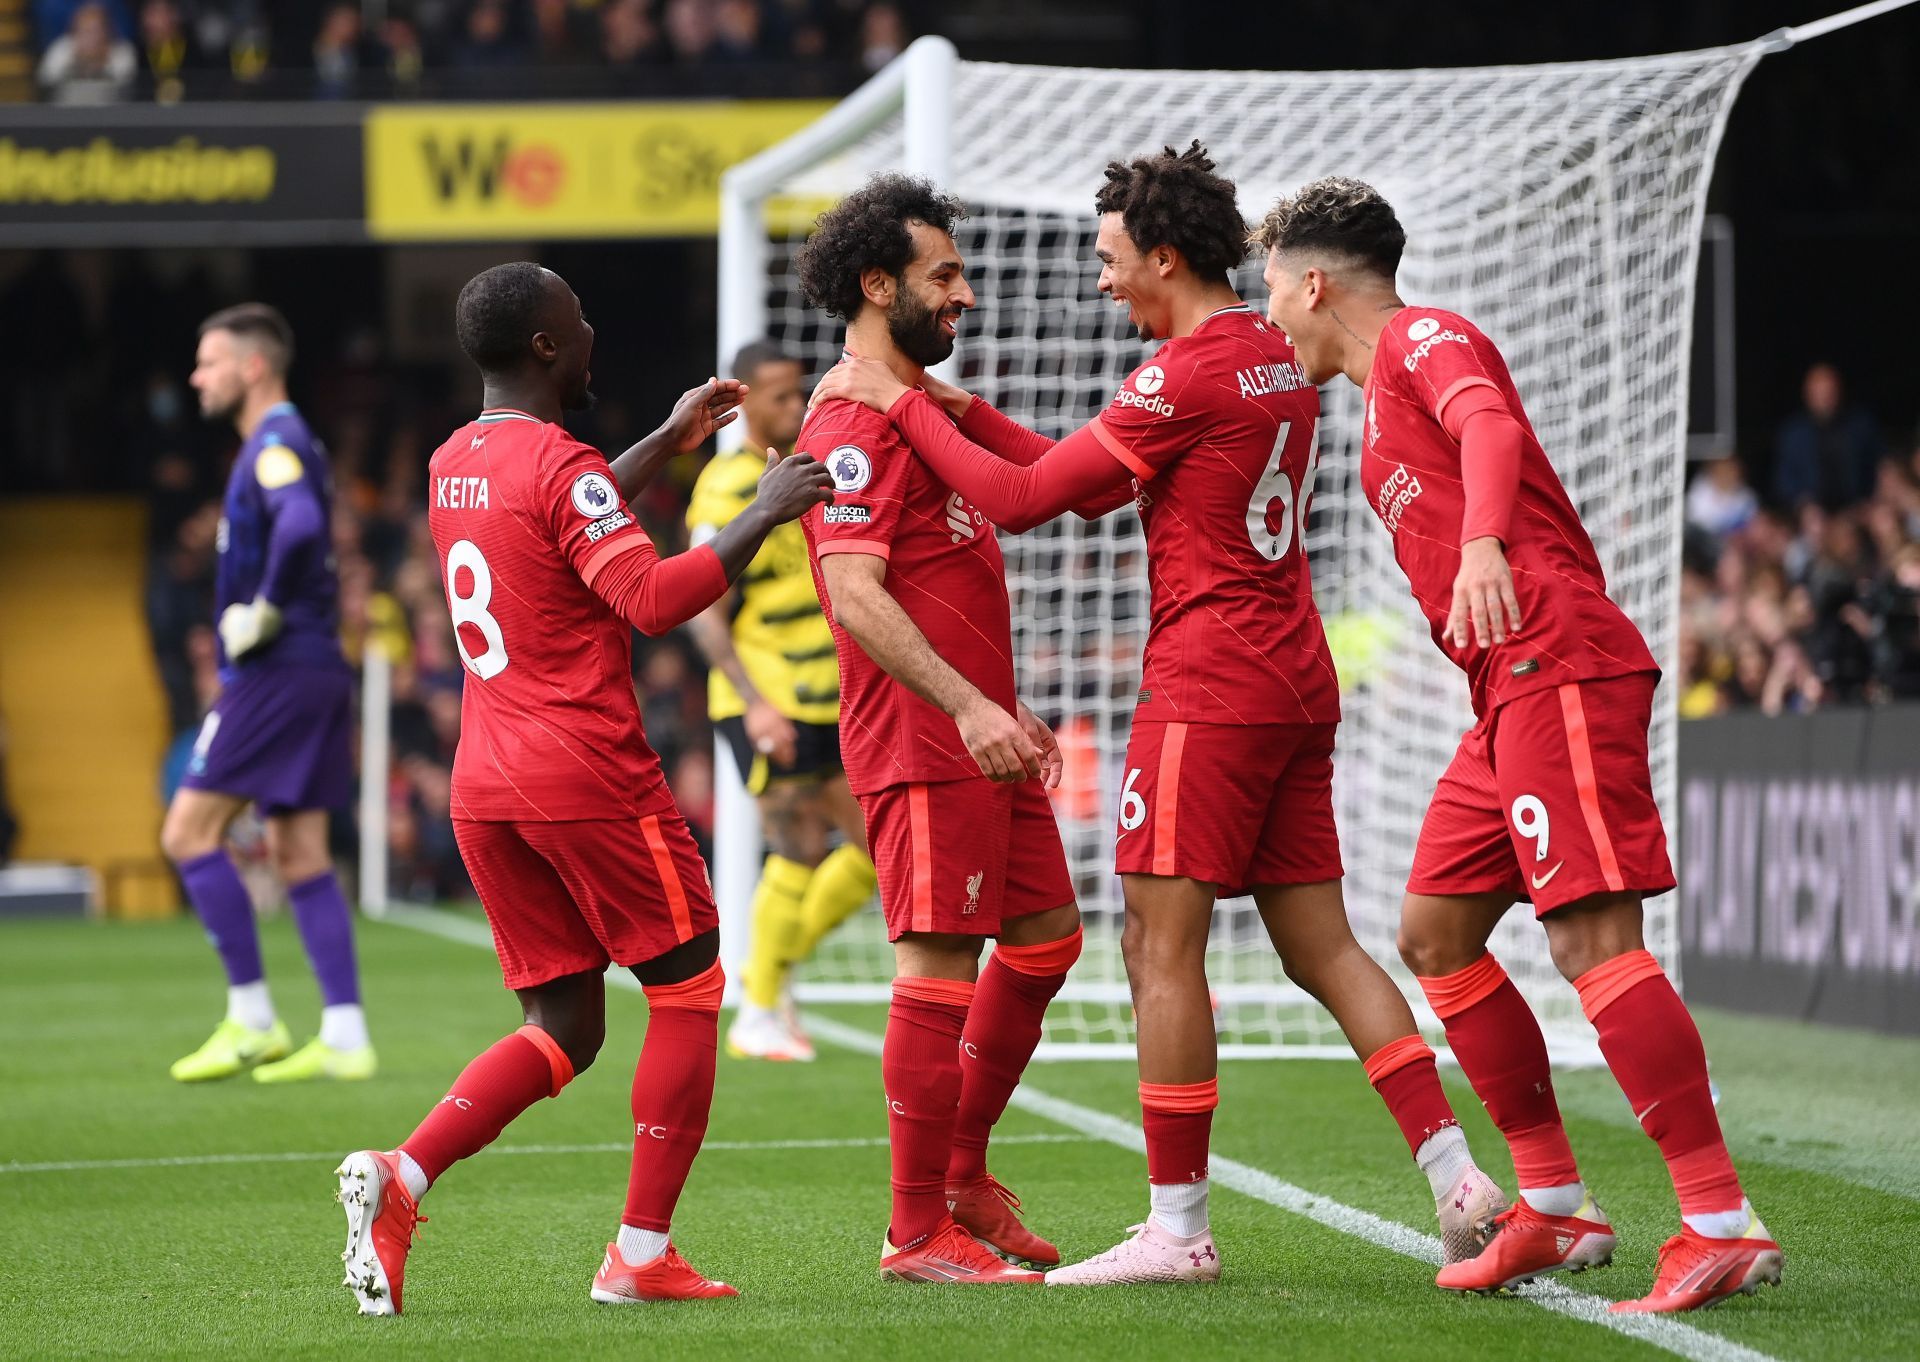 Liverpool have one of the most lethal attacking units in Europe